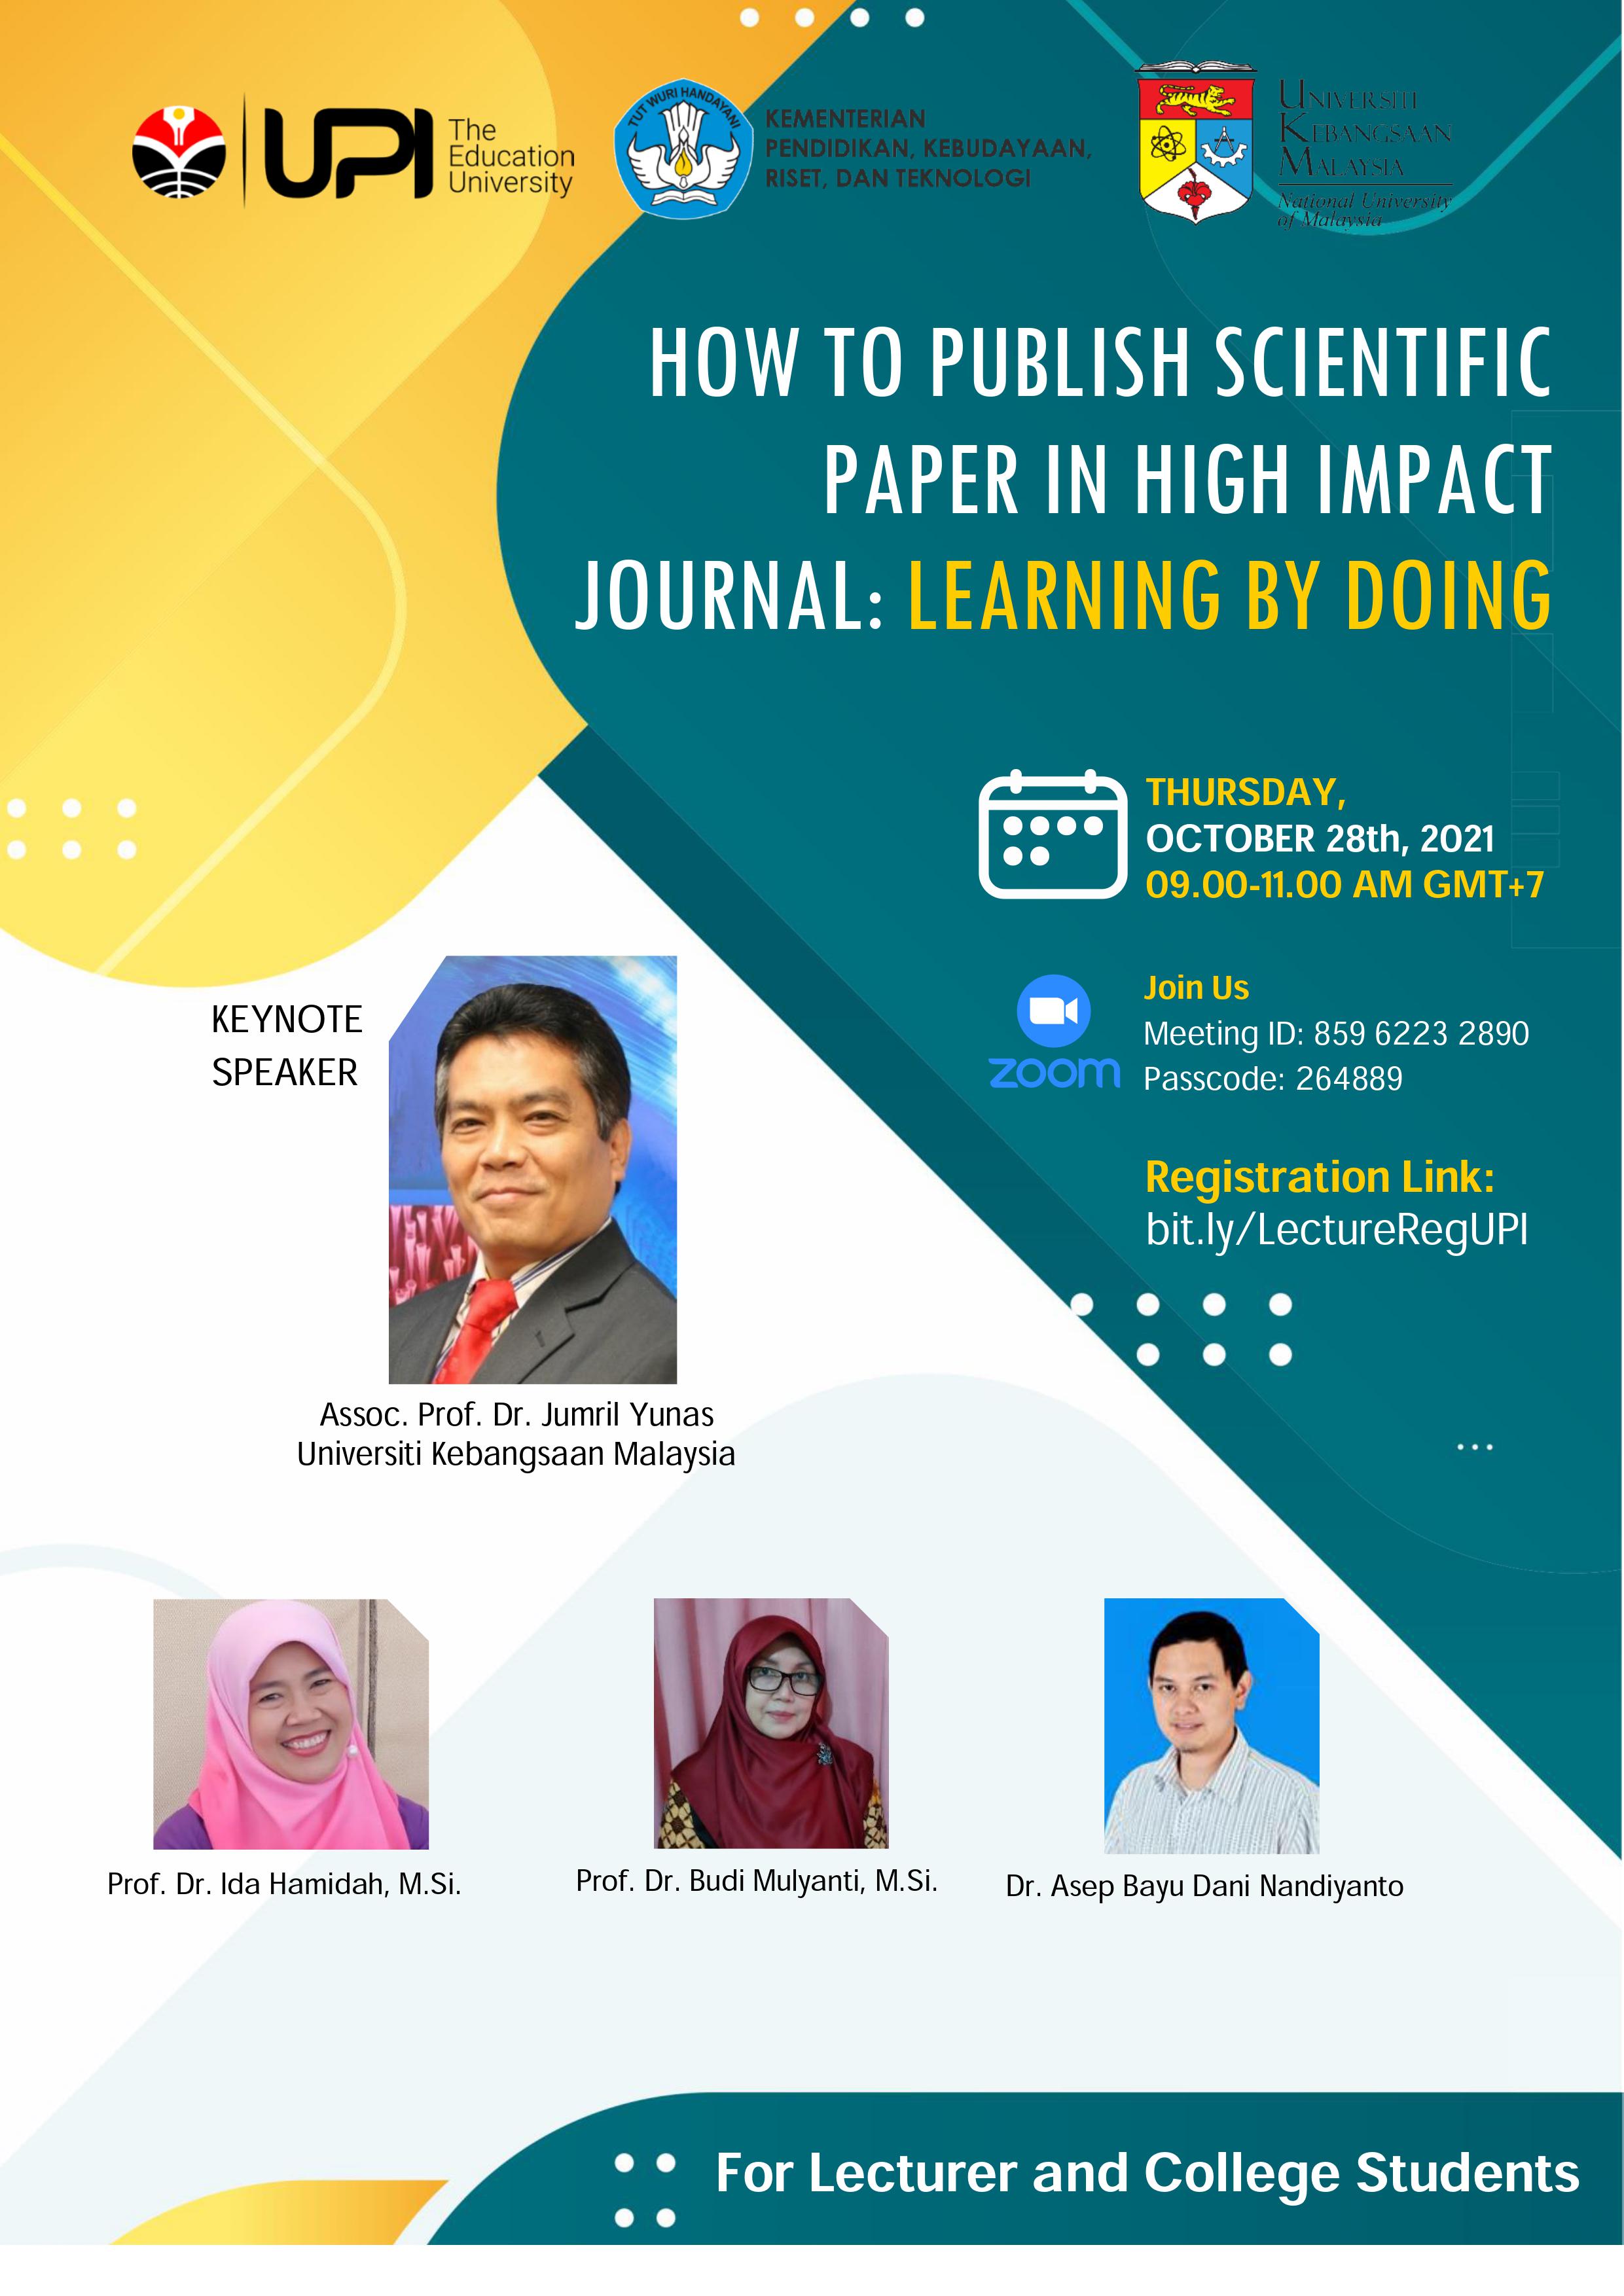 HOW TO PUBLISH SCIENTIFIC PAPER IN HIGH IMPACT JOURNAL: LEARNING BY DOING